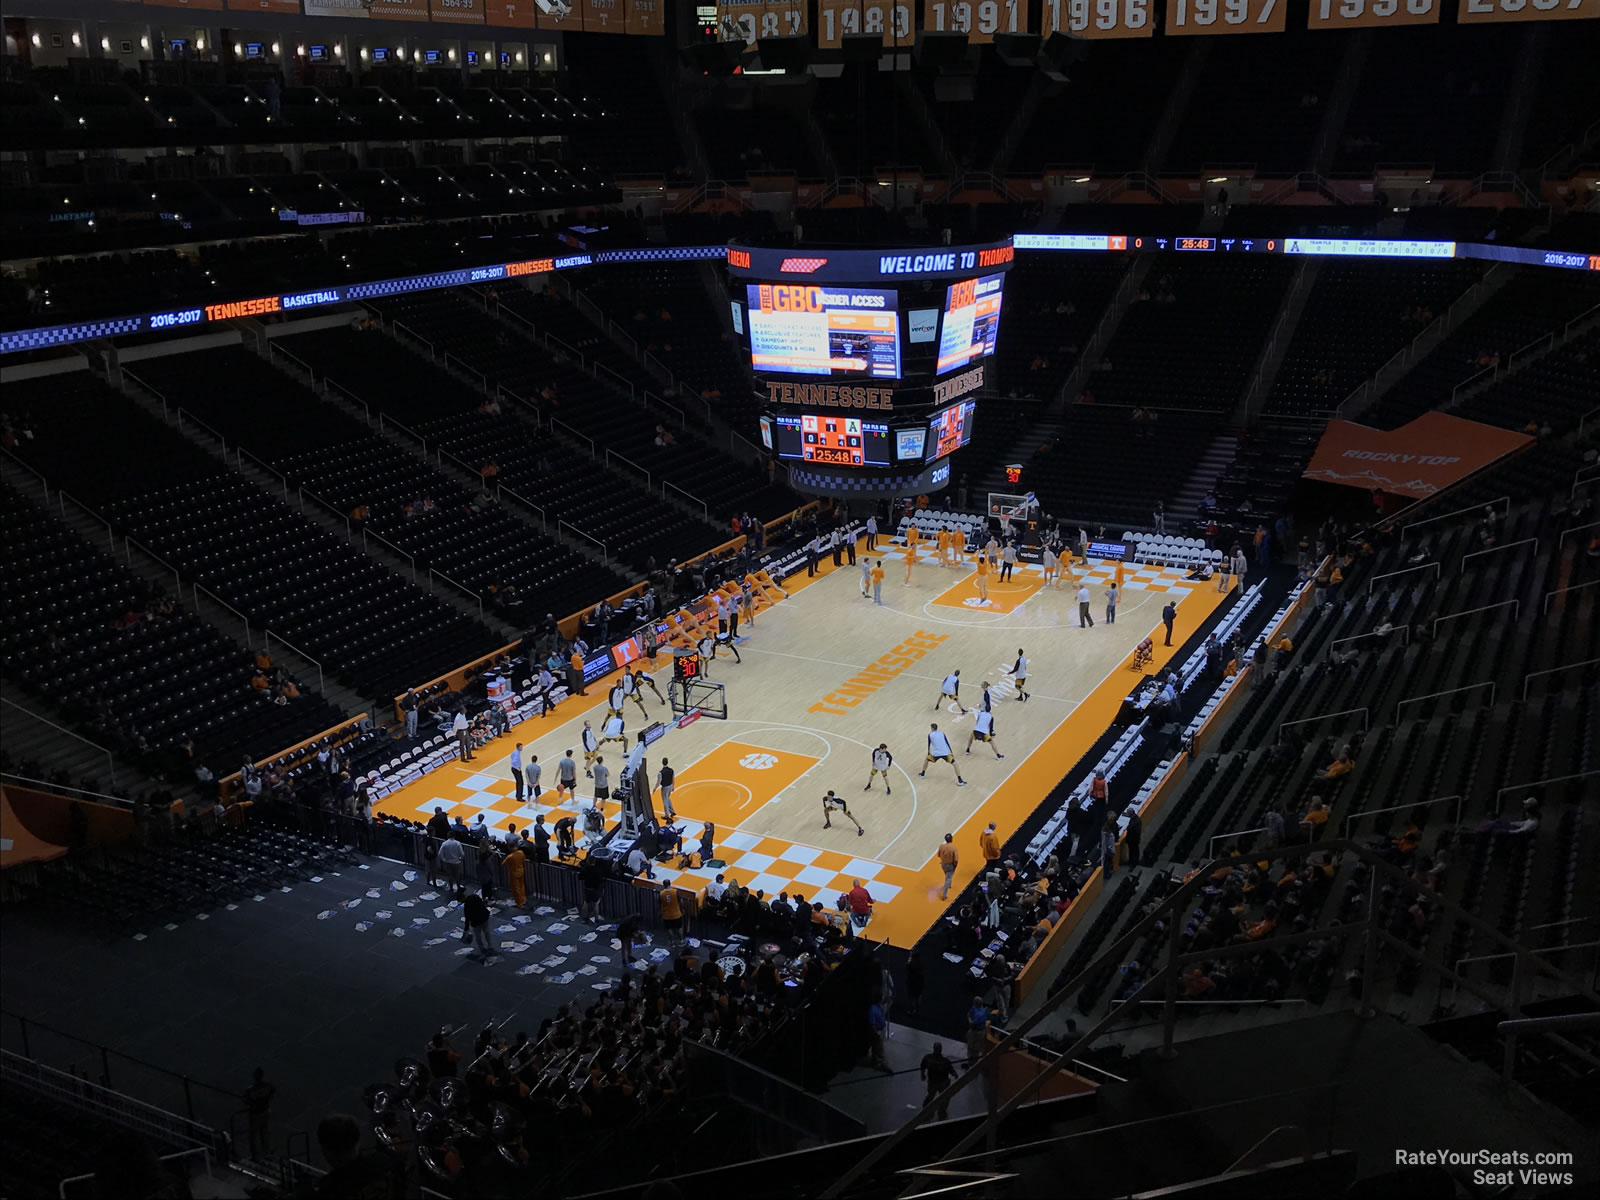 Thompson Boling Arena Seating Chart Rows